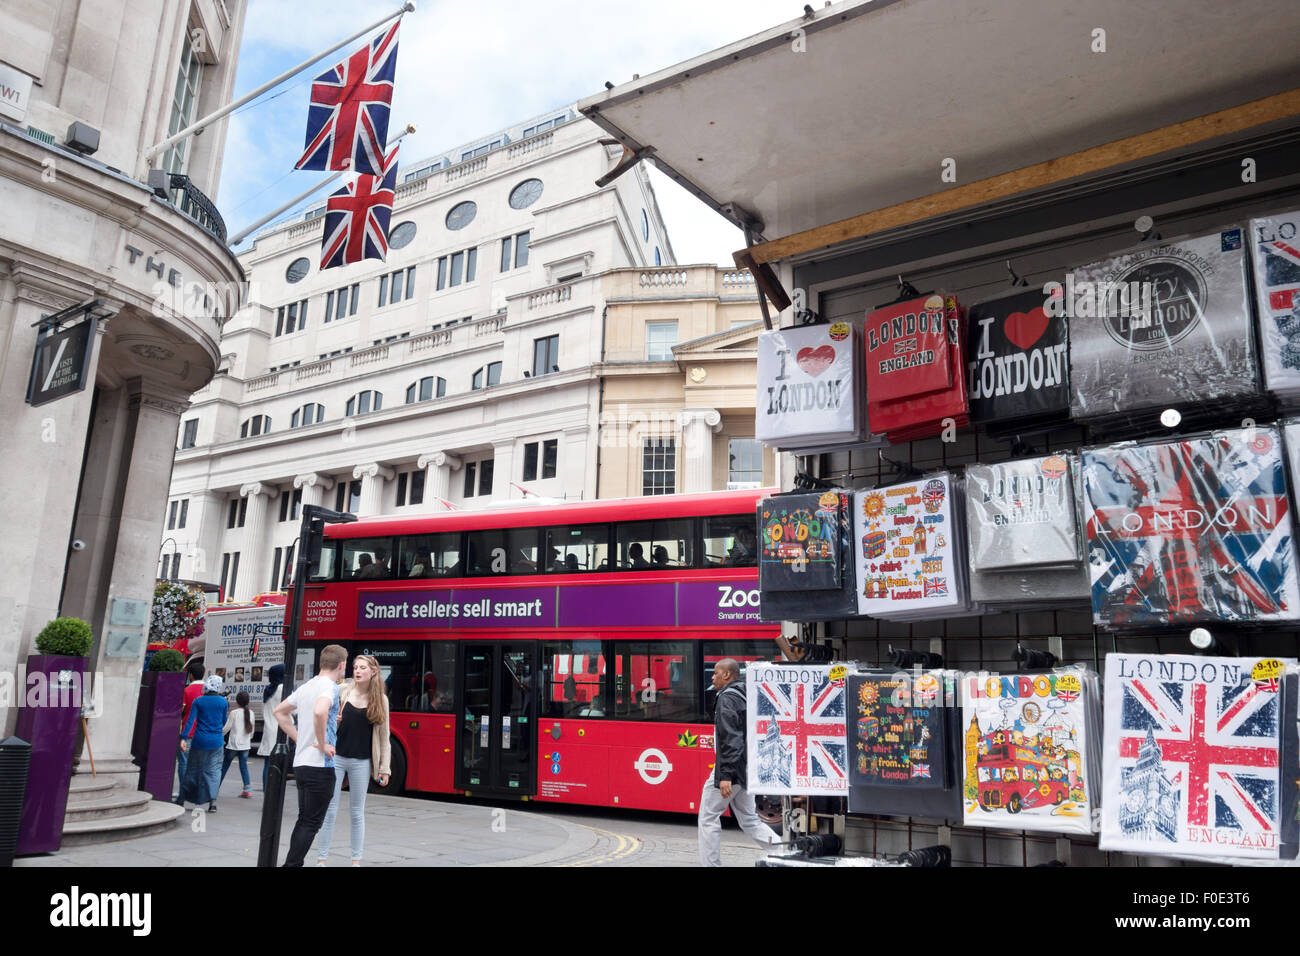 London street scene with stall, Union Jacks and red bus, The Strand, London UK Stock Photo